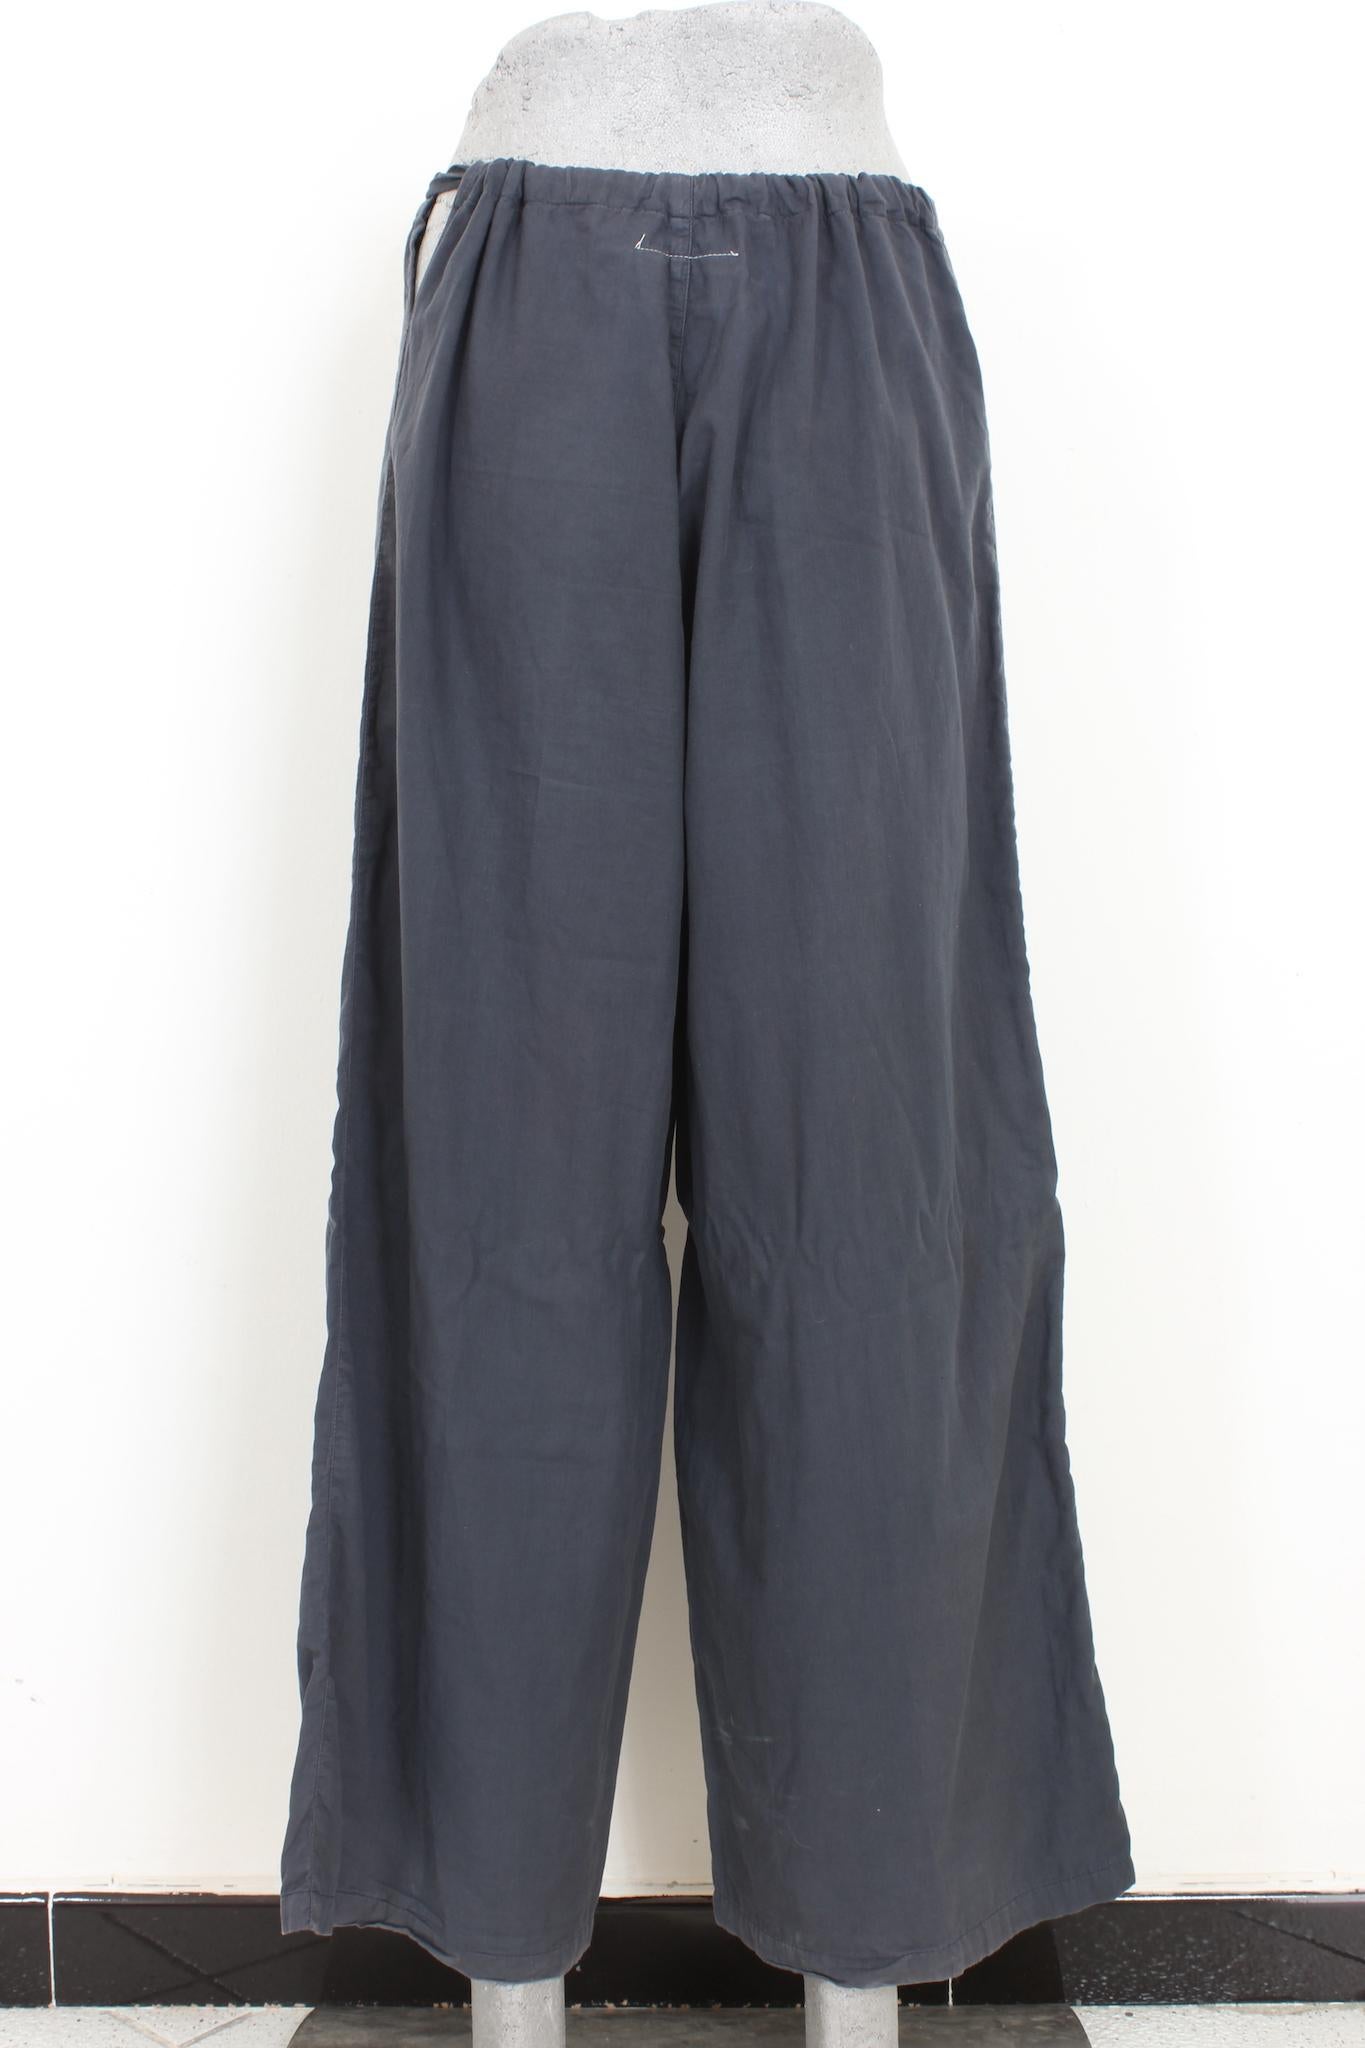 Martin Margiela 2000s wide leg pants. Dark gray color, closure with adjustable laces at the waist. 100% cotton fabric. Made in Italy.

Size: 42 IT 8 Us 10 Uk

Waist: 45cm
Length: 99cm
Hem: 31cm
Trouser crotch: 72 cm